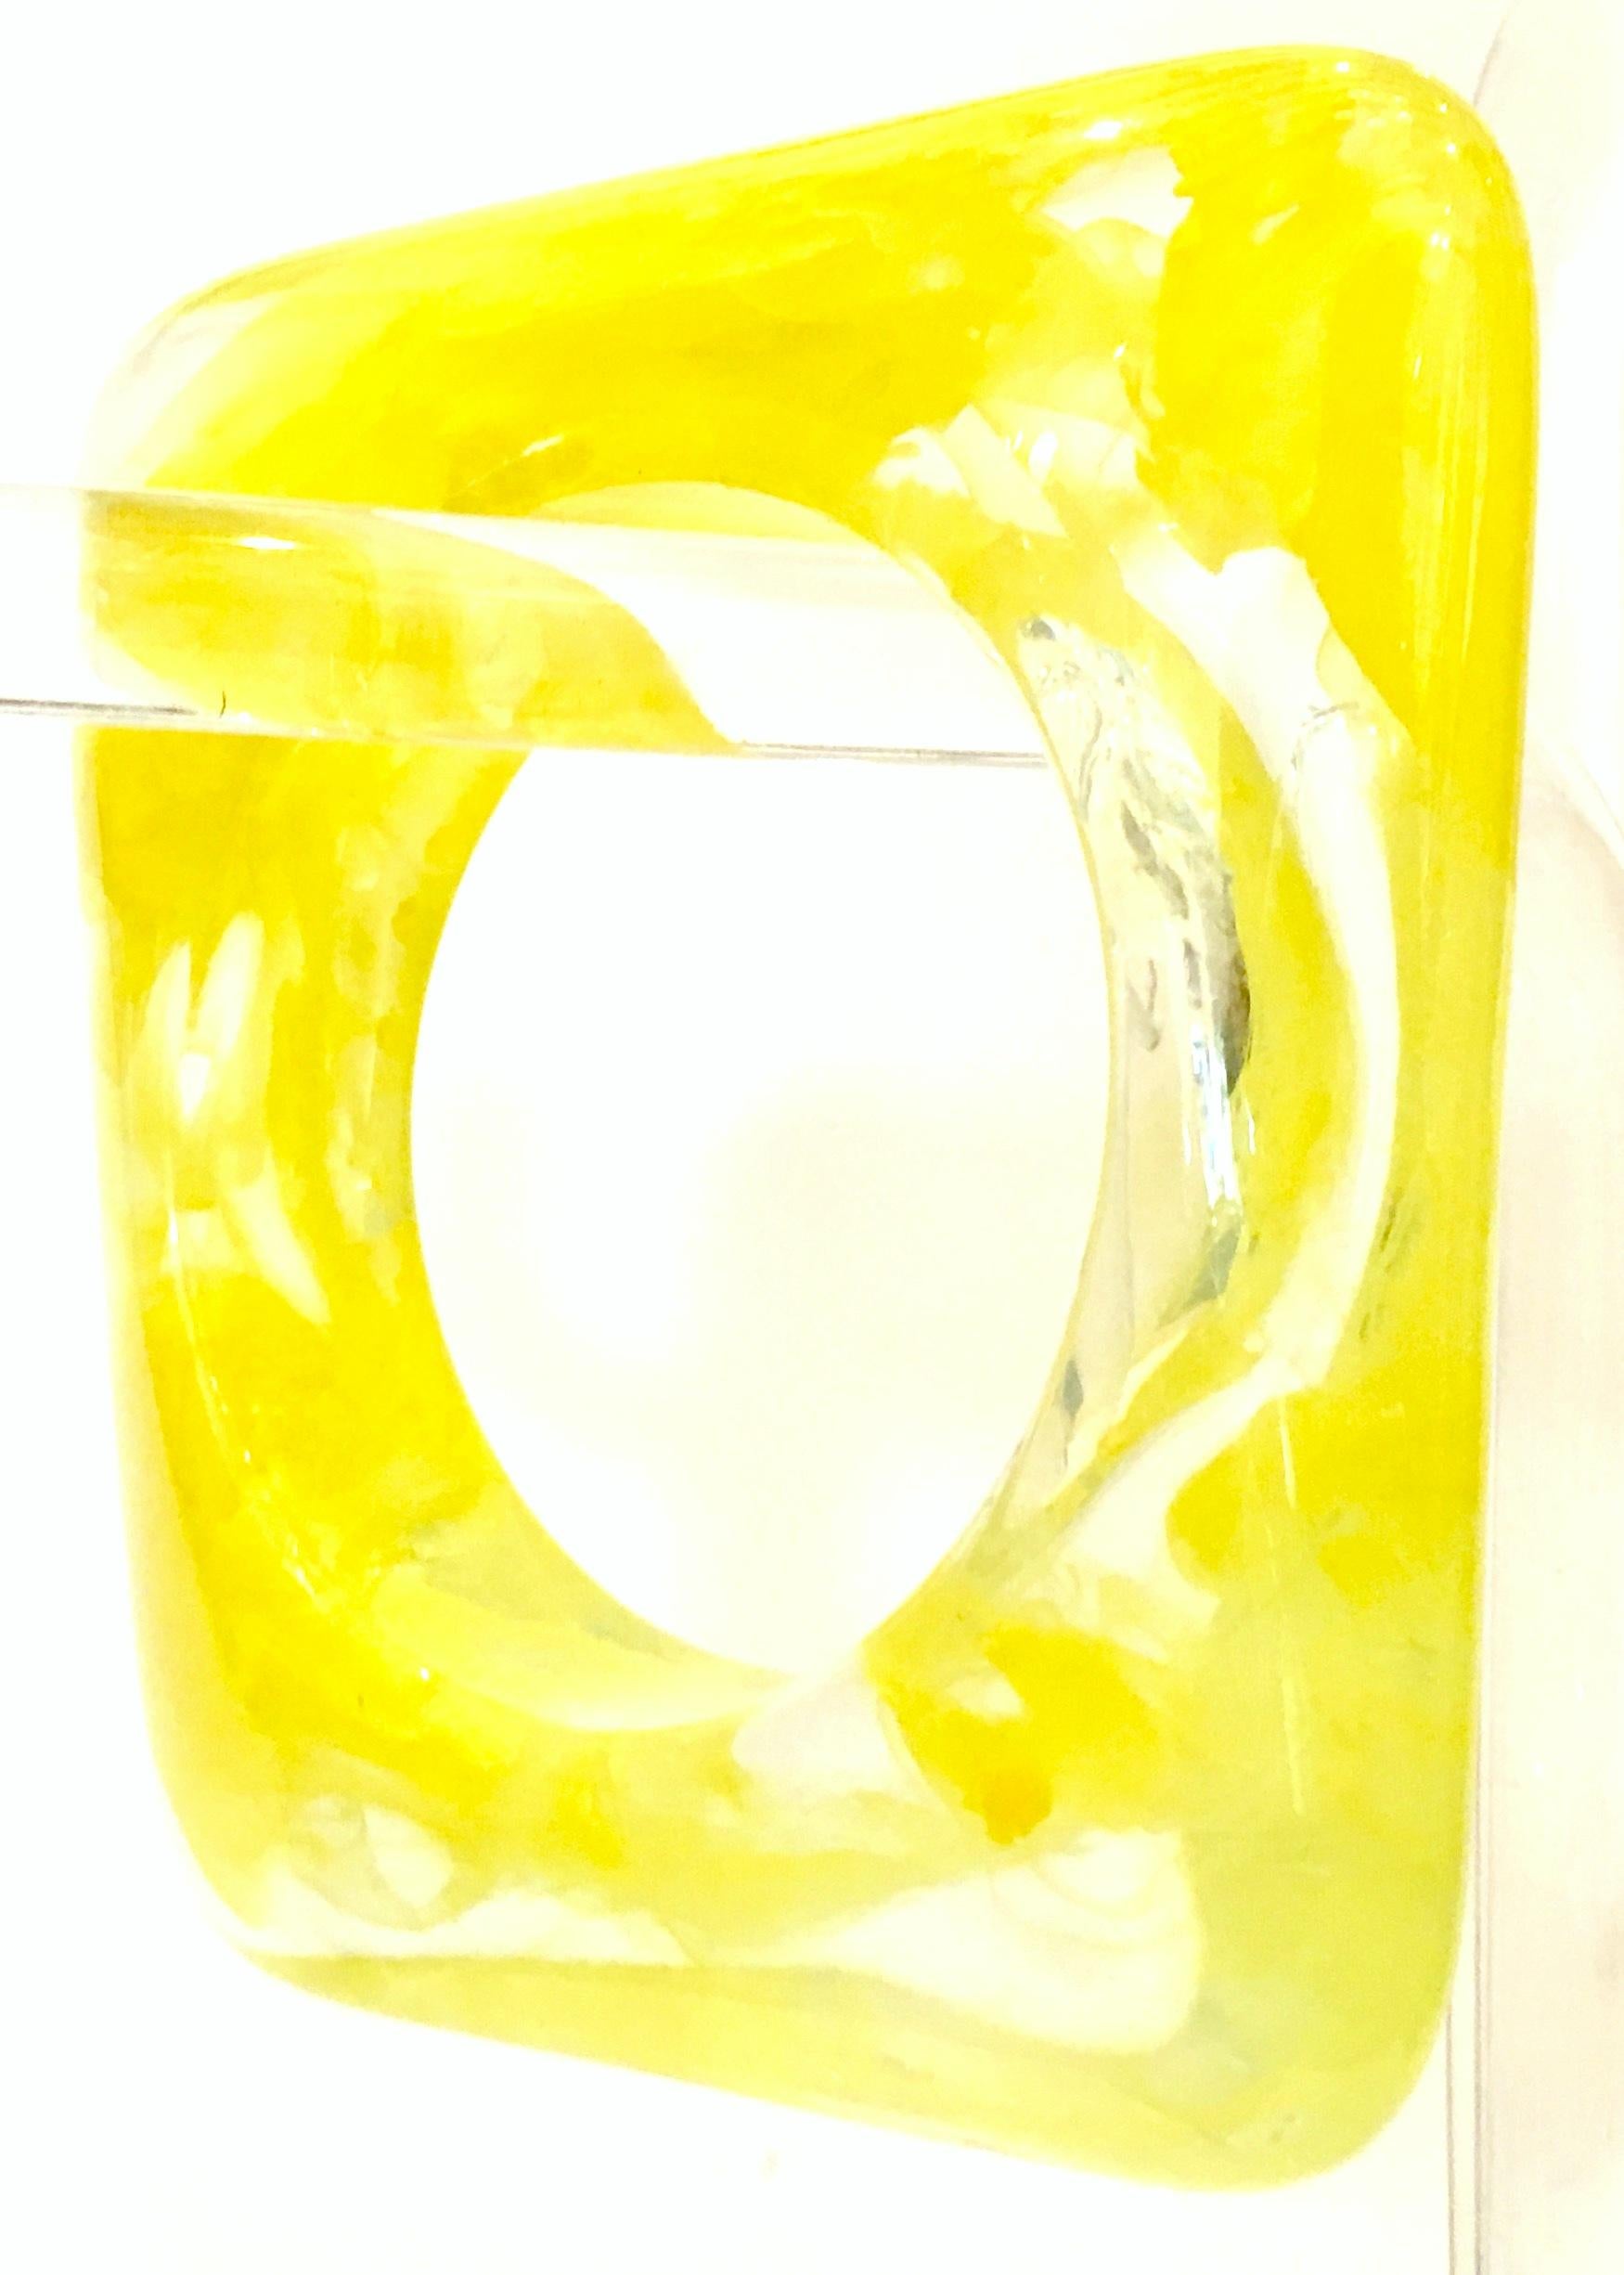 Vintage Neon Yellow Marbleized Organic Form Lucite Circle In A Square Bangle Bracelet. Interior 
measures, 3